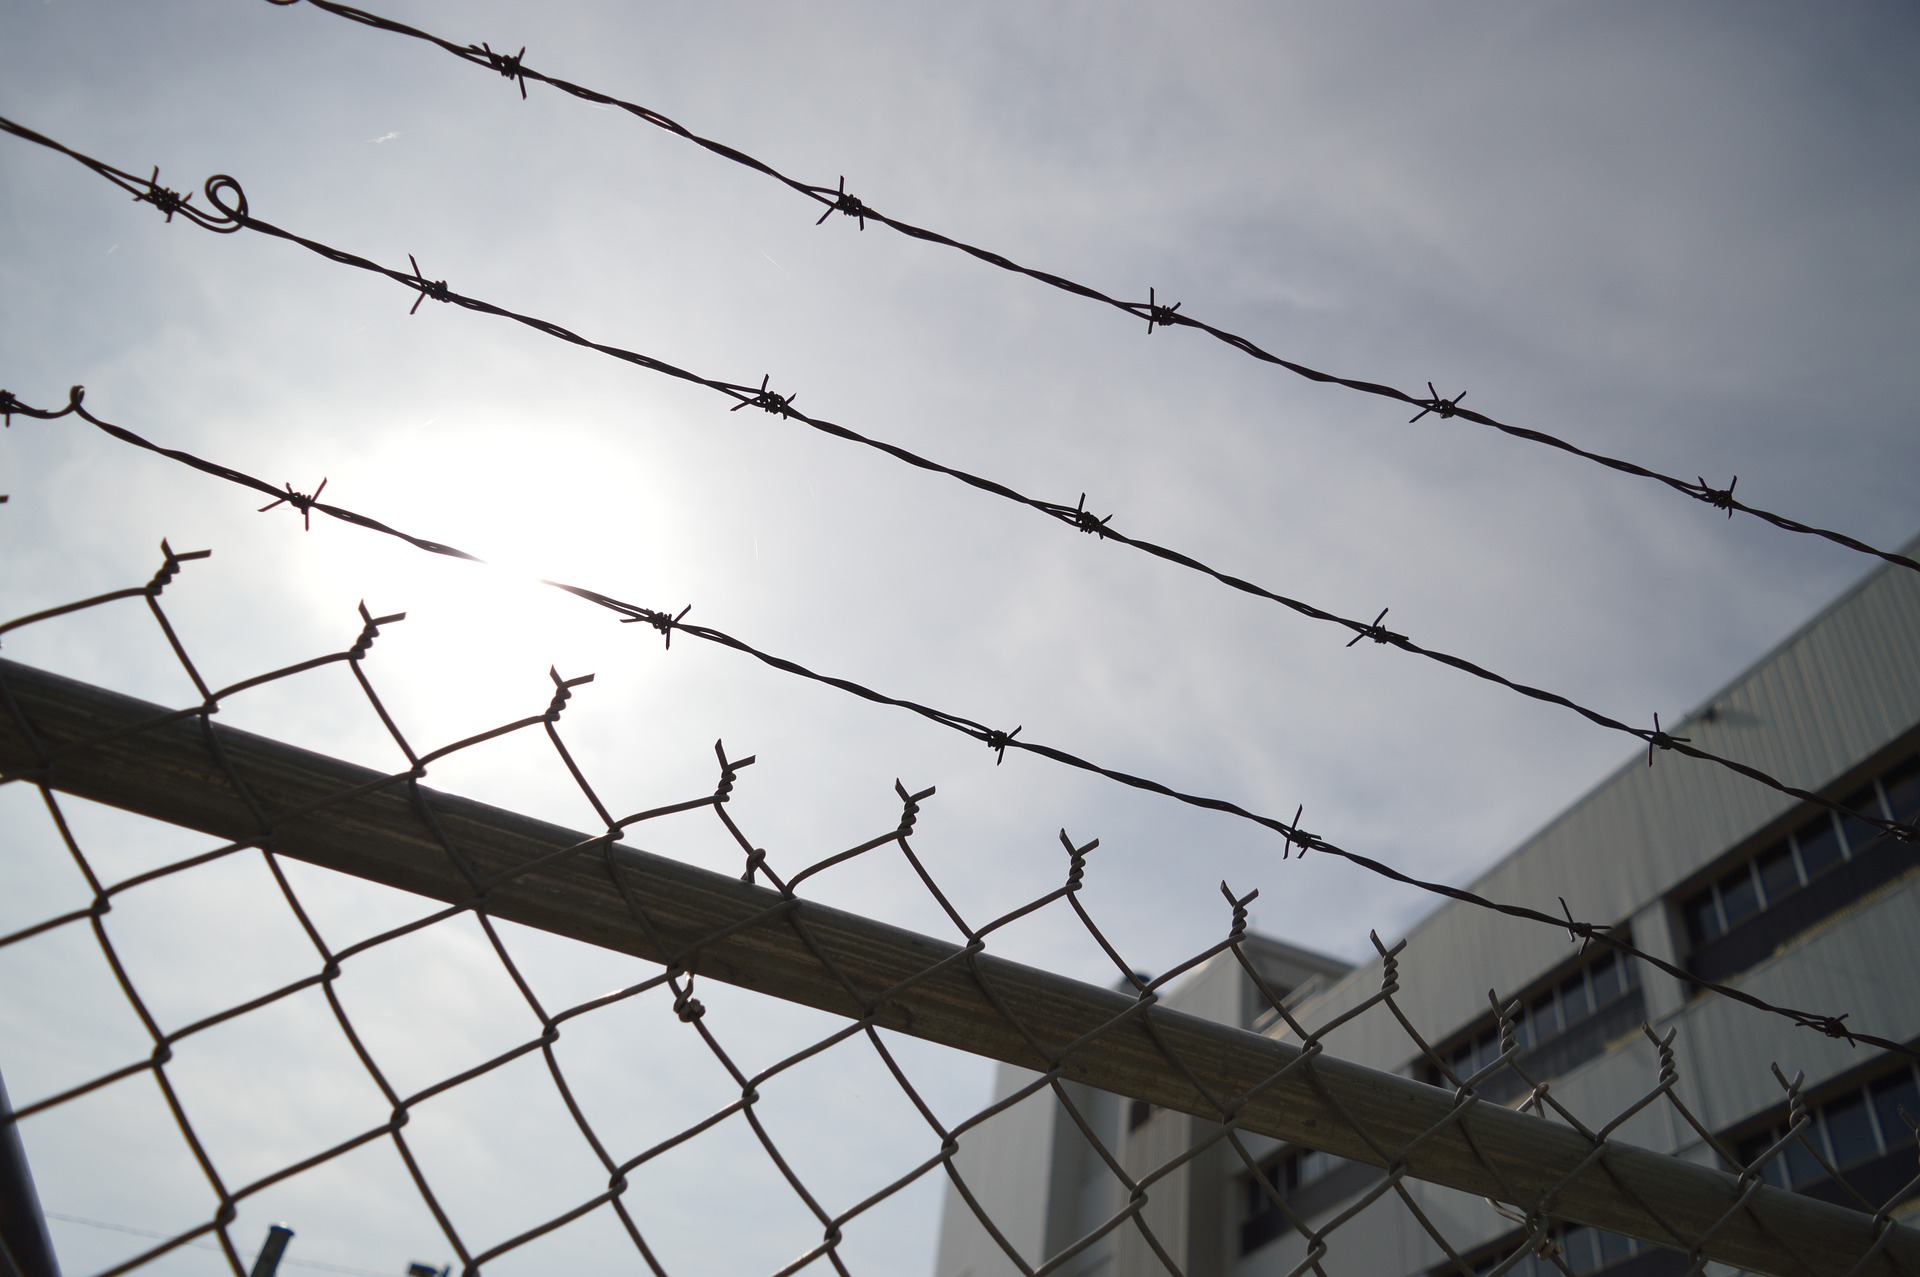 barbed-wire-g6387d067d_1920.jpg